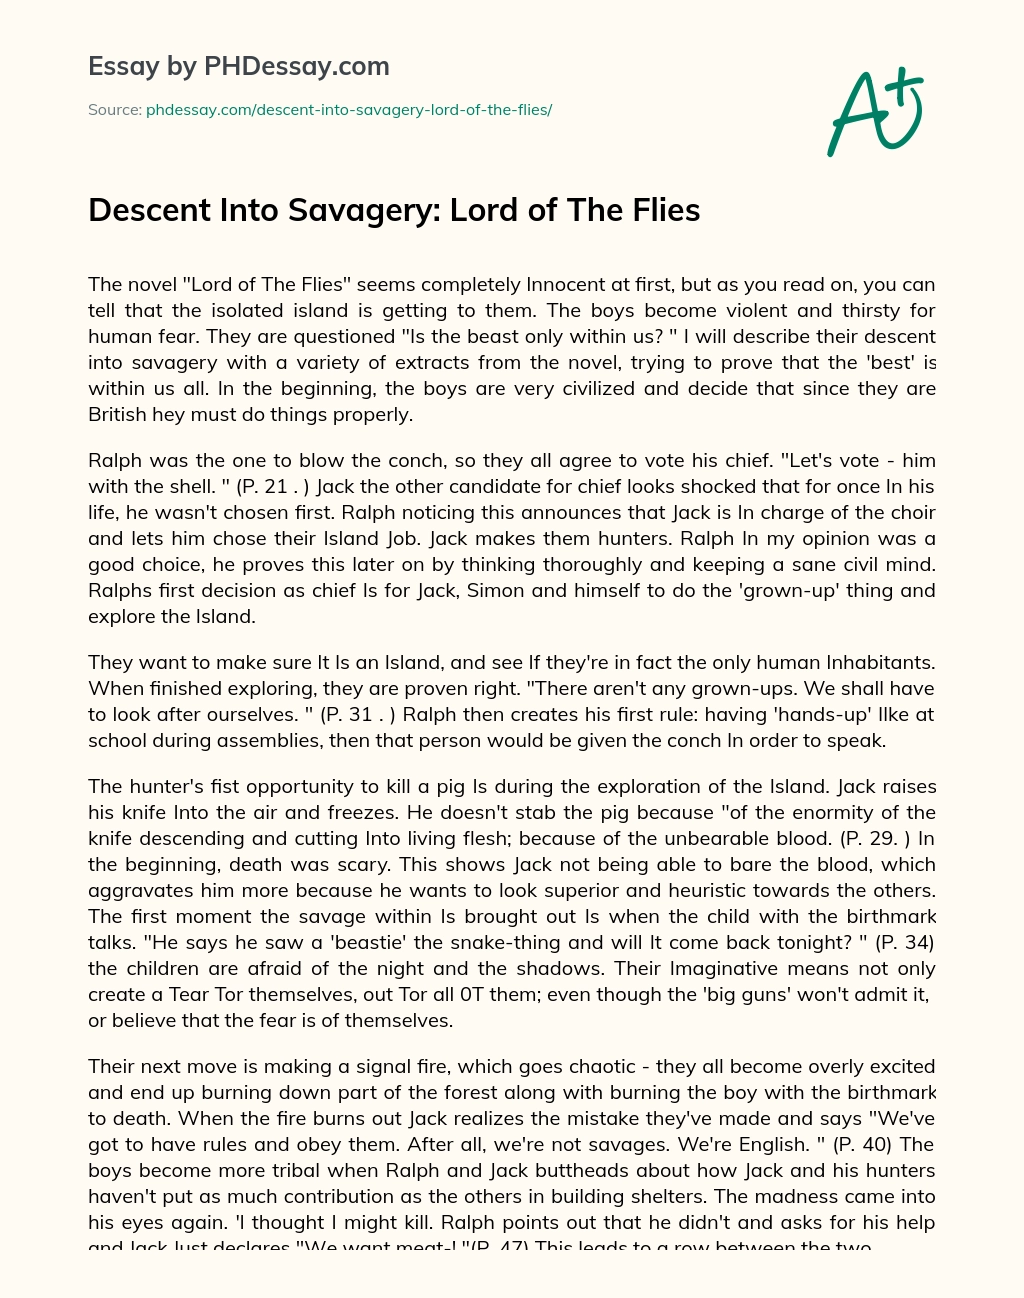 Descent Into Savagery: Lord of The Flies essay